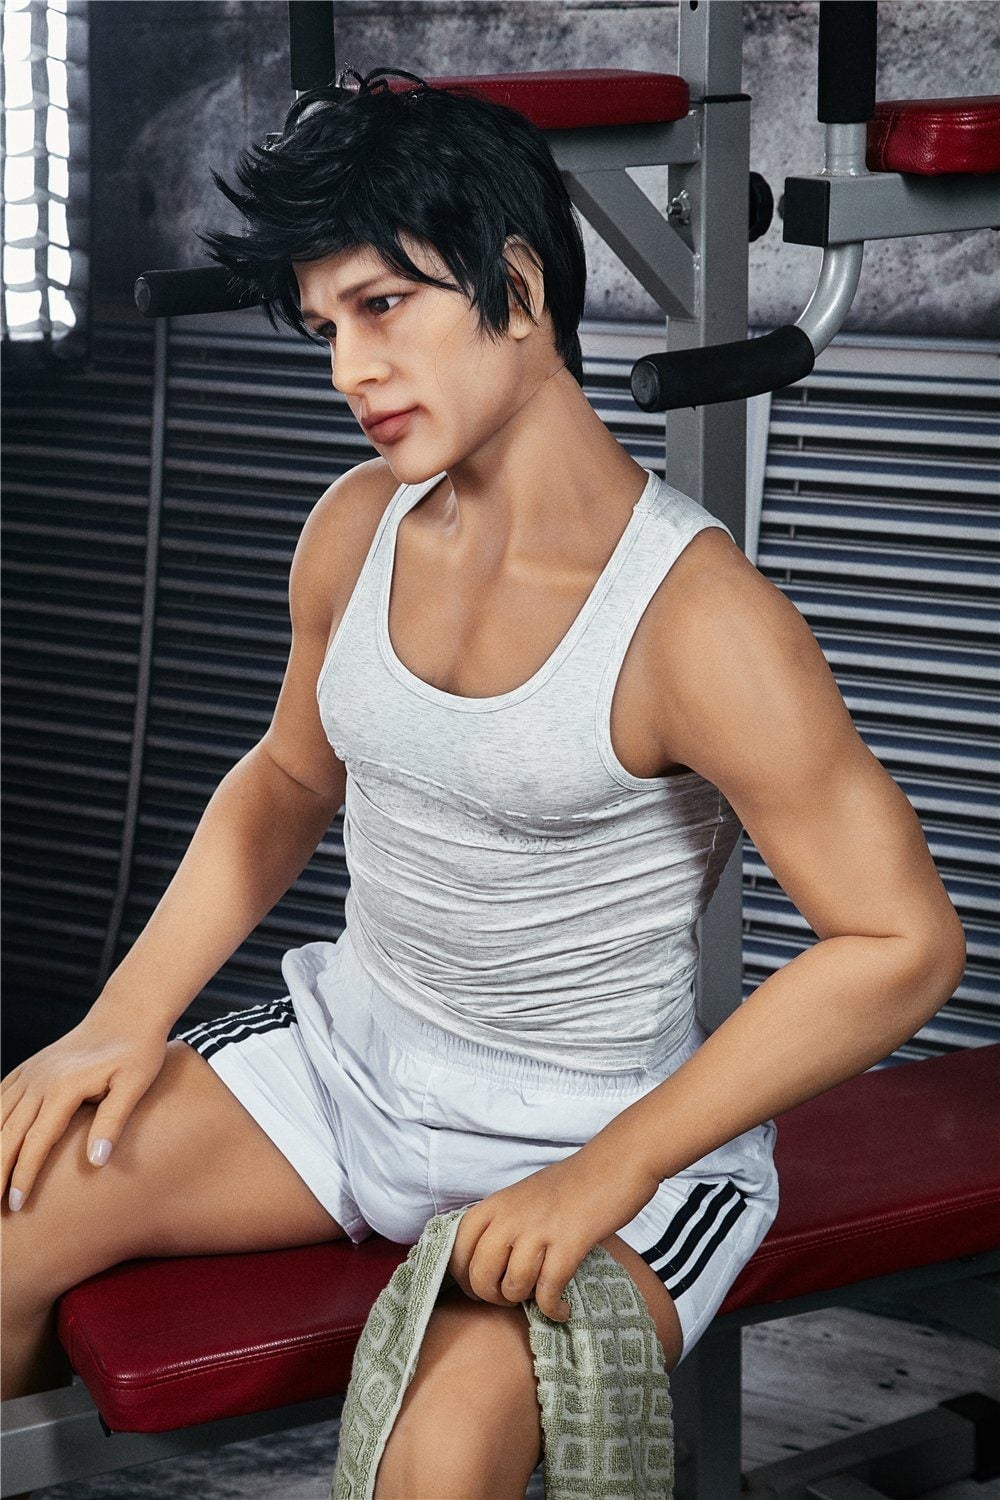 Charles TPE Male Doll - Iron Tech Doll Irontech Doll